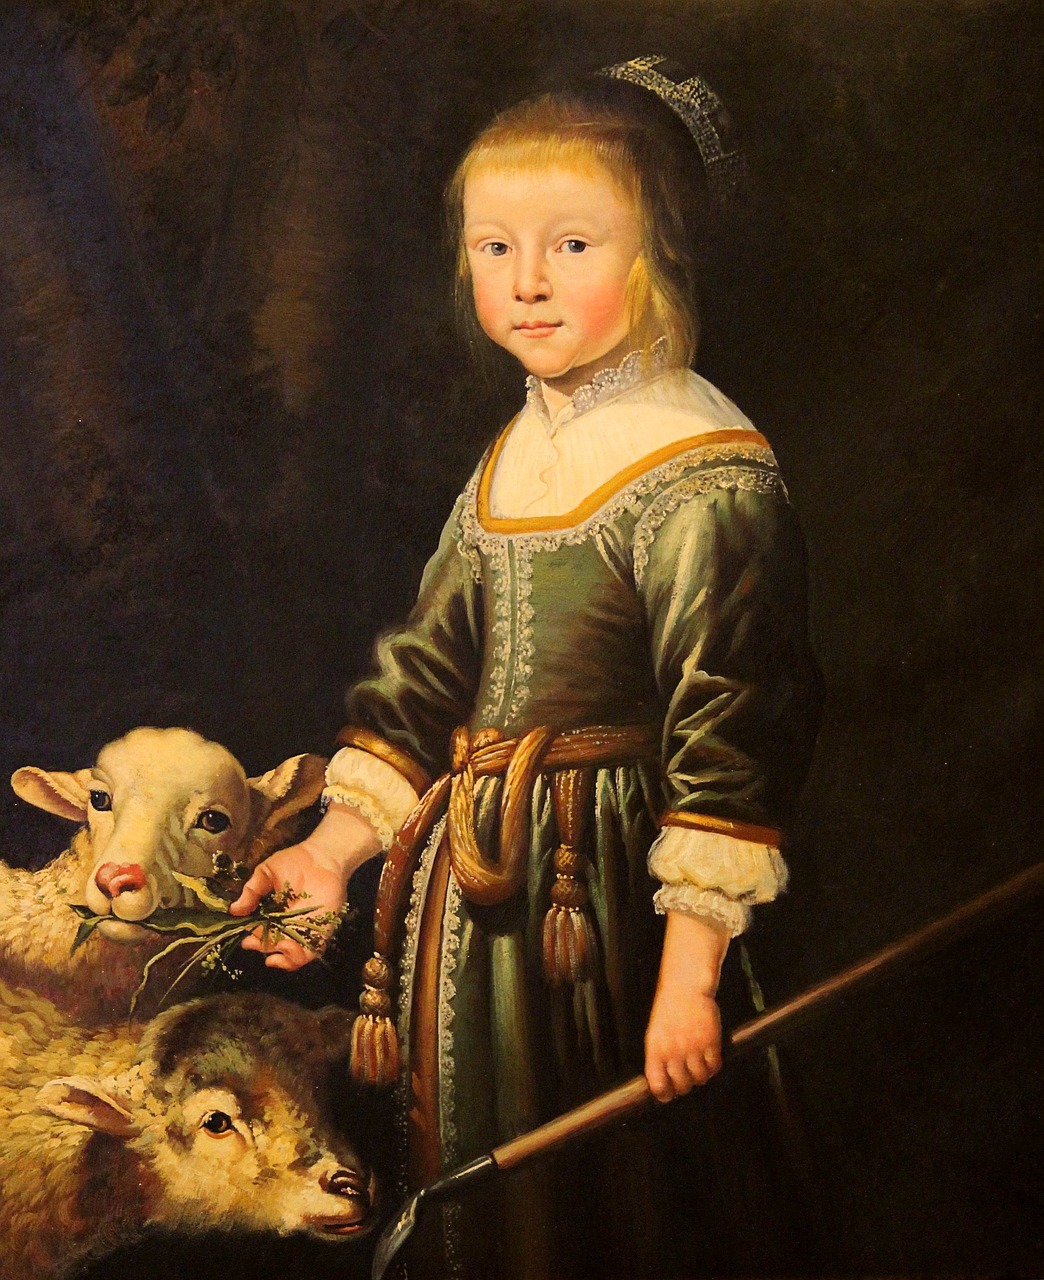 a painting of a young girl with two sheep, inspired by Gerard de Lairesse, pexels, jan davidsz de heem, full detail, ann stokes, of a 1 7 th century